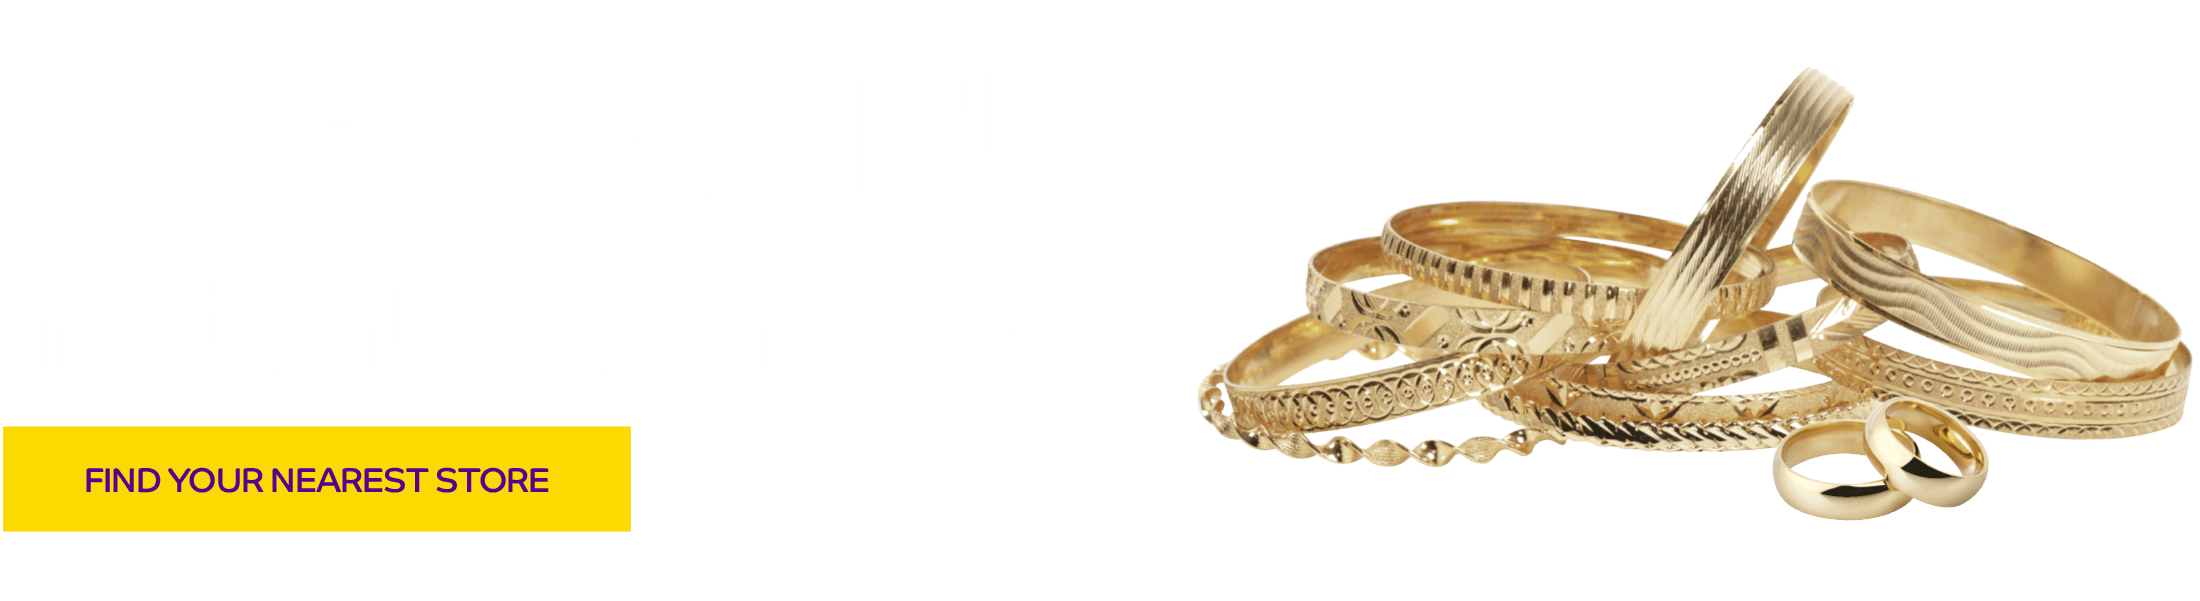 We Buy Gold - Instant Cash Paid